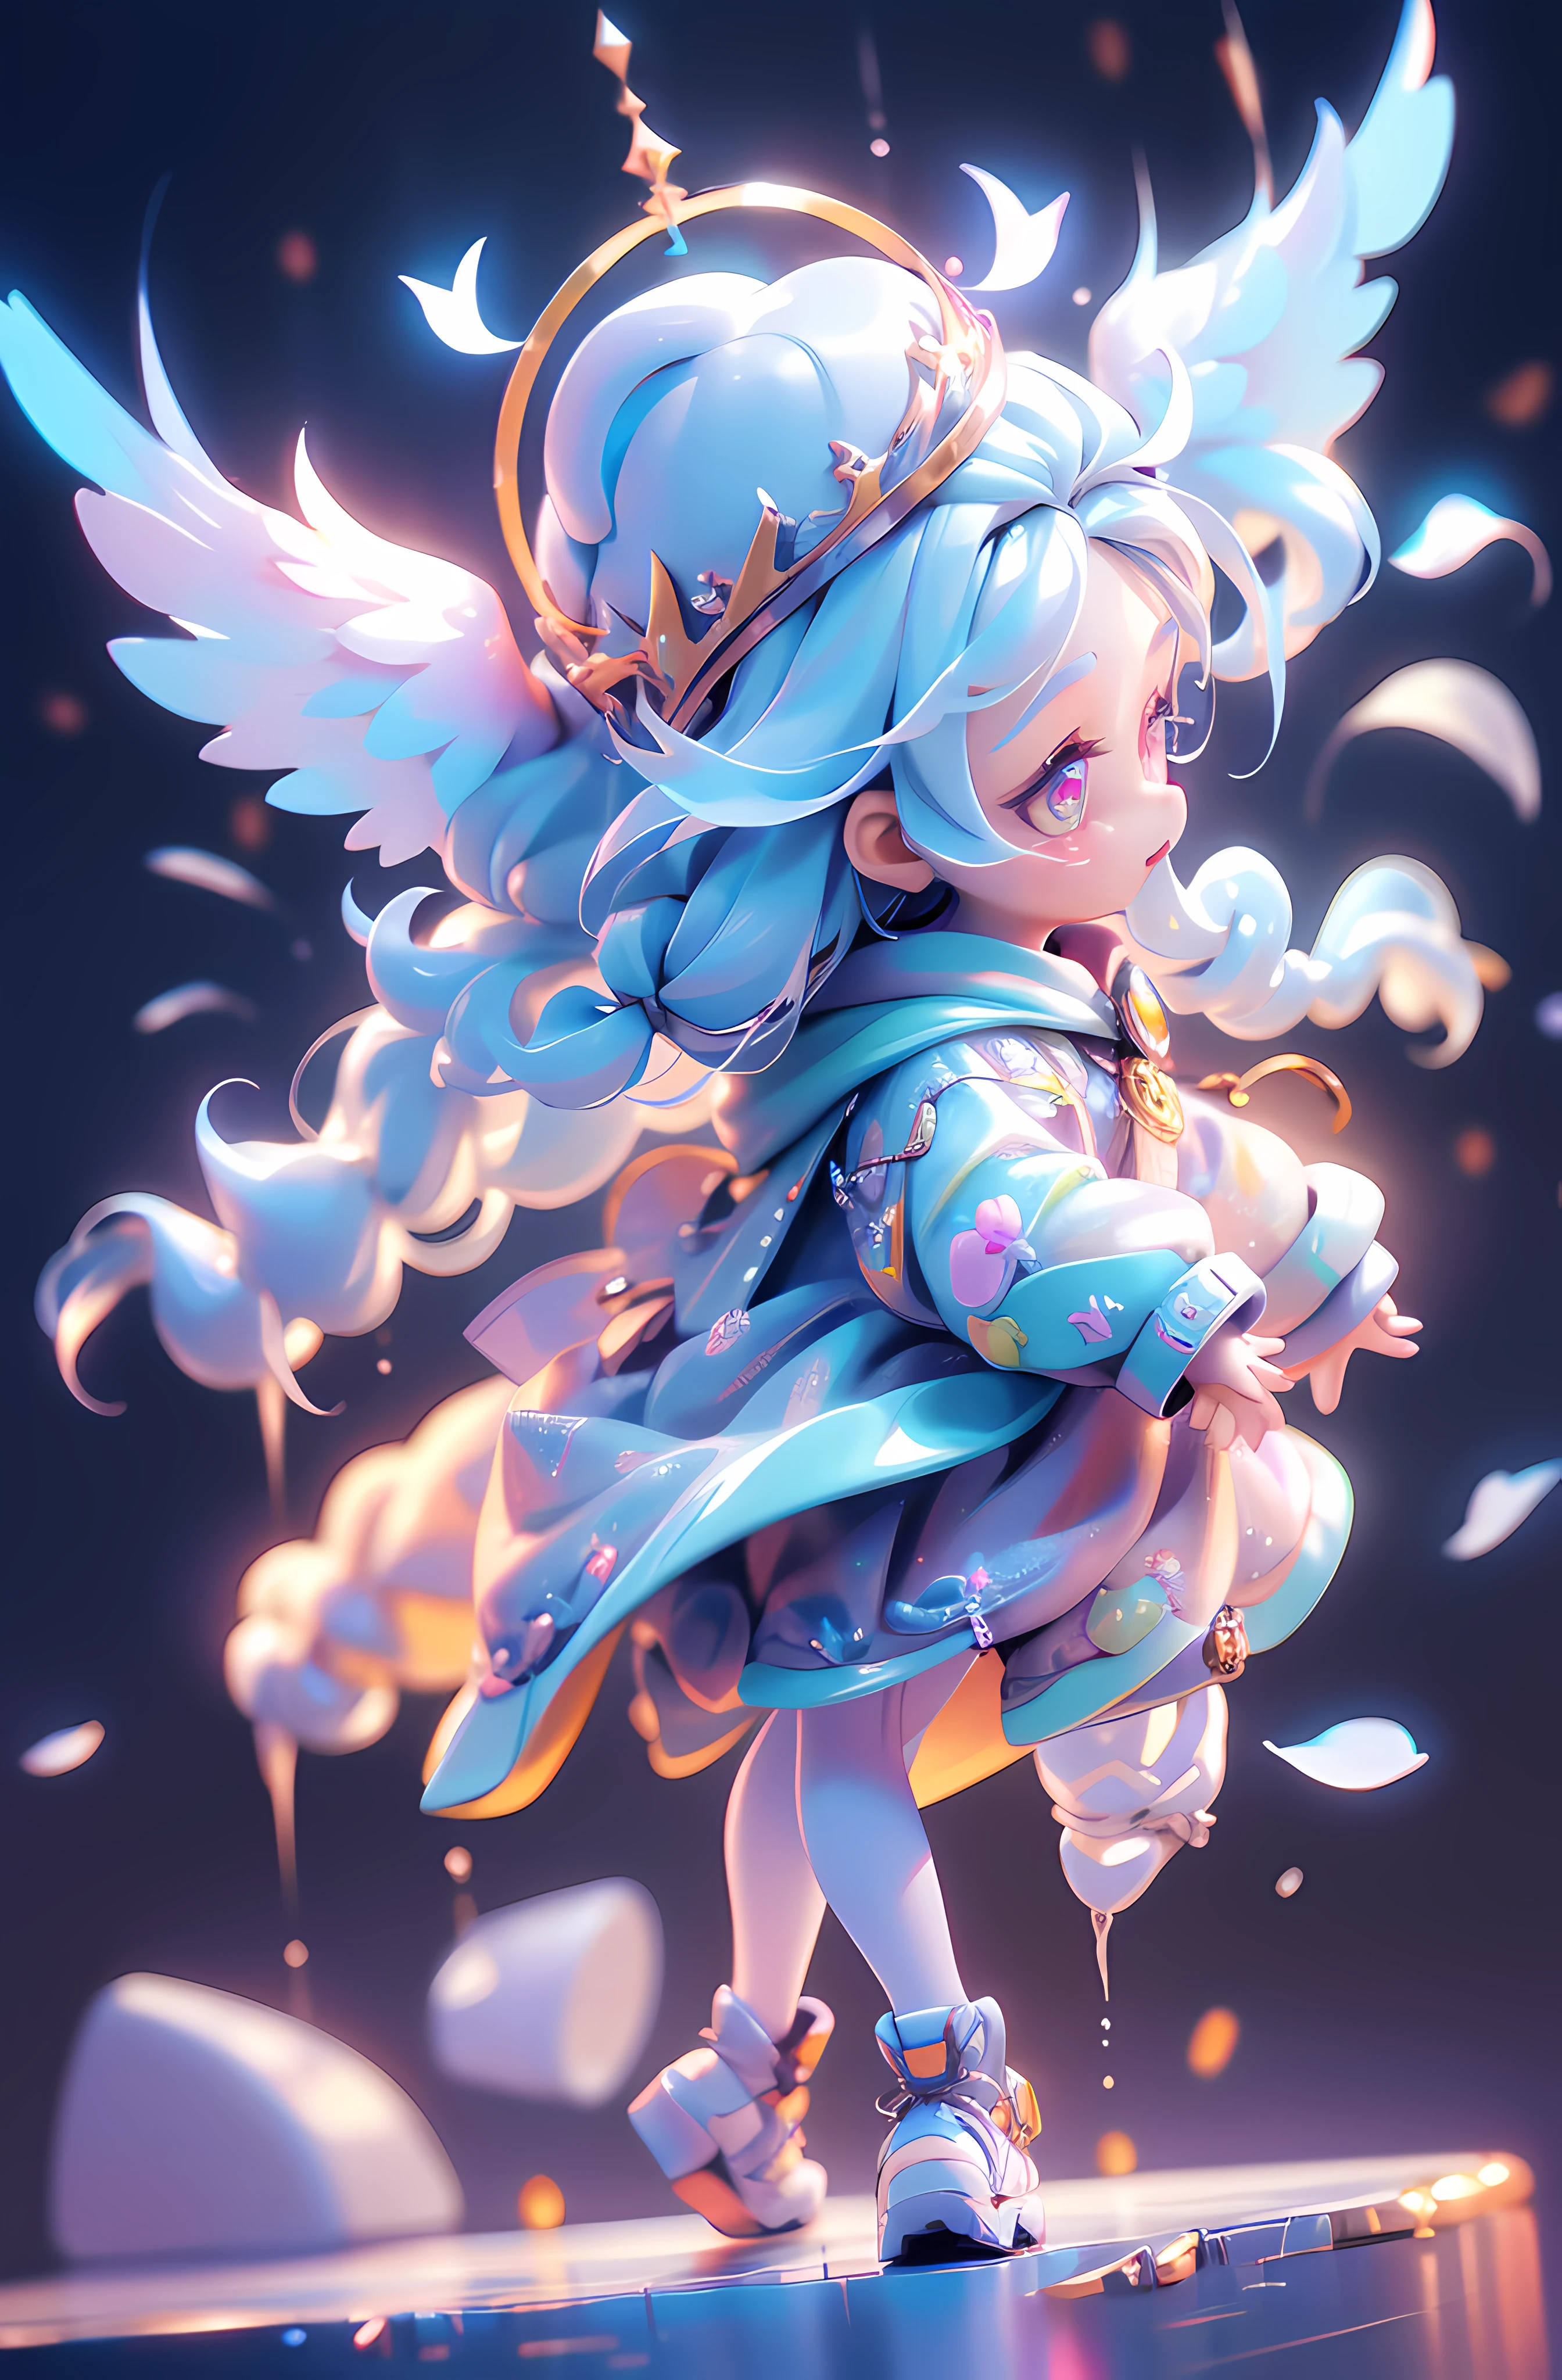 (Masterpiece: 1.4), (Best Quality: 1.4), (Chibi: 1.3), (Very Cute Angel Girl, Super Detailed Face, Jewel-like Eyes, White Very Long Hair, Colorful Gradient Hair: 1.4), (Angel Ring:
1.4), (Angel Wings: 1.4), (Full body, perfect 2 arms, perfect 2 legs: 1.4), Perfect 4 fingers: 1 thumb, light, shine, bokeh, super fine